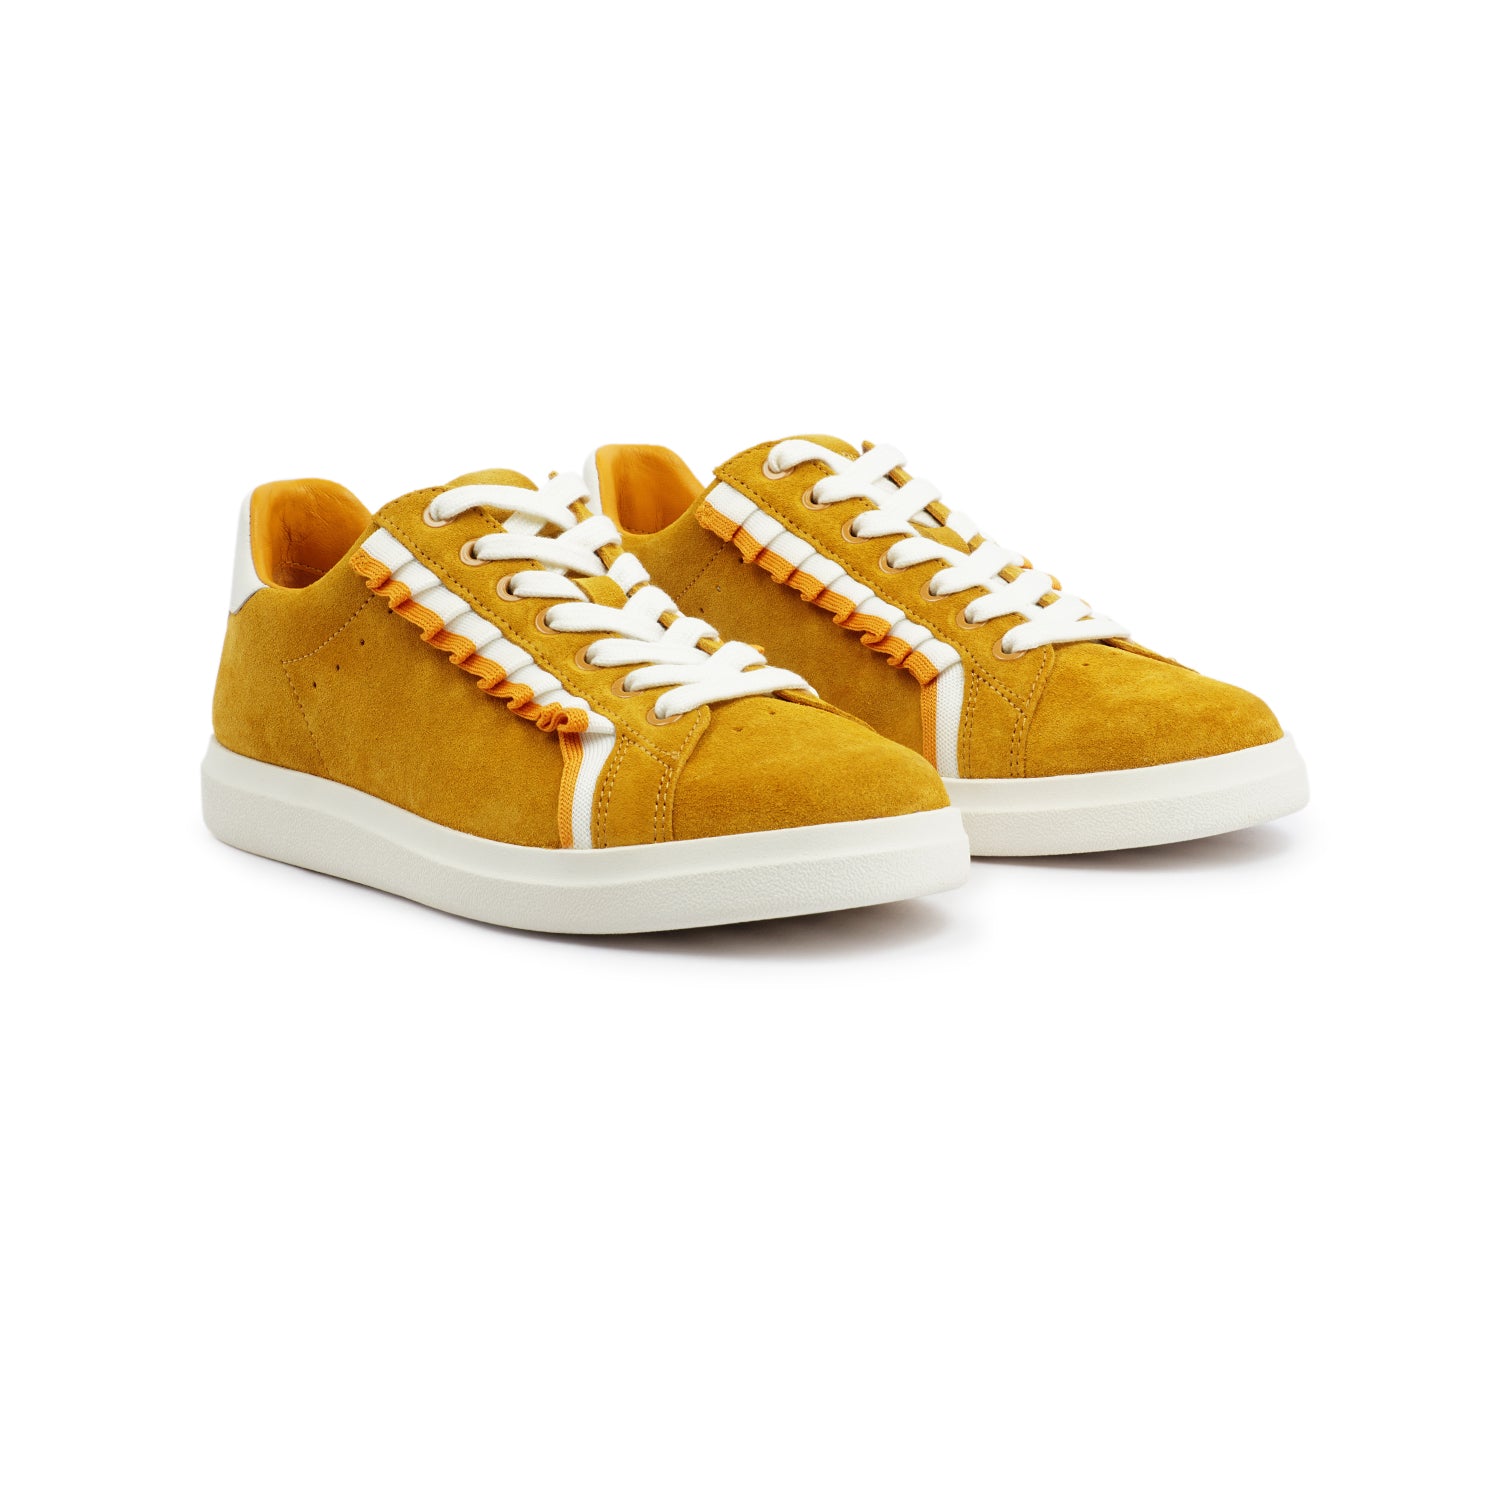 TORY BURCH HOWELL RUFFLE COURT IN YELLOW – Galleria di Lux